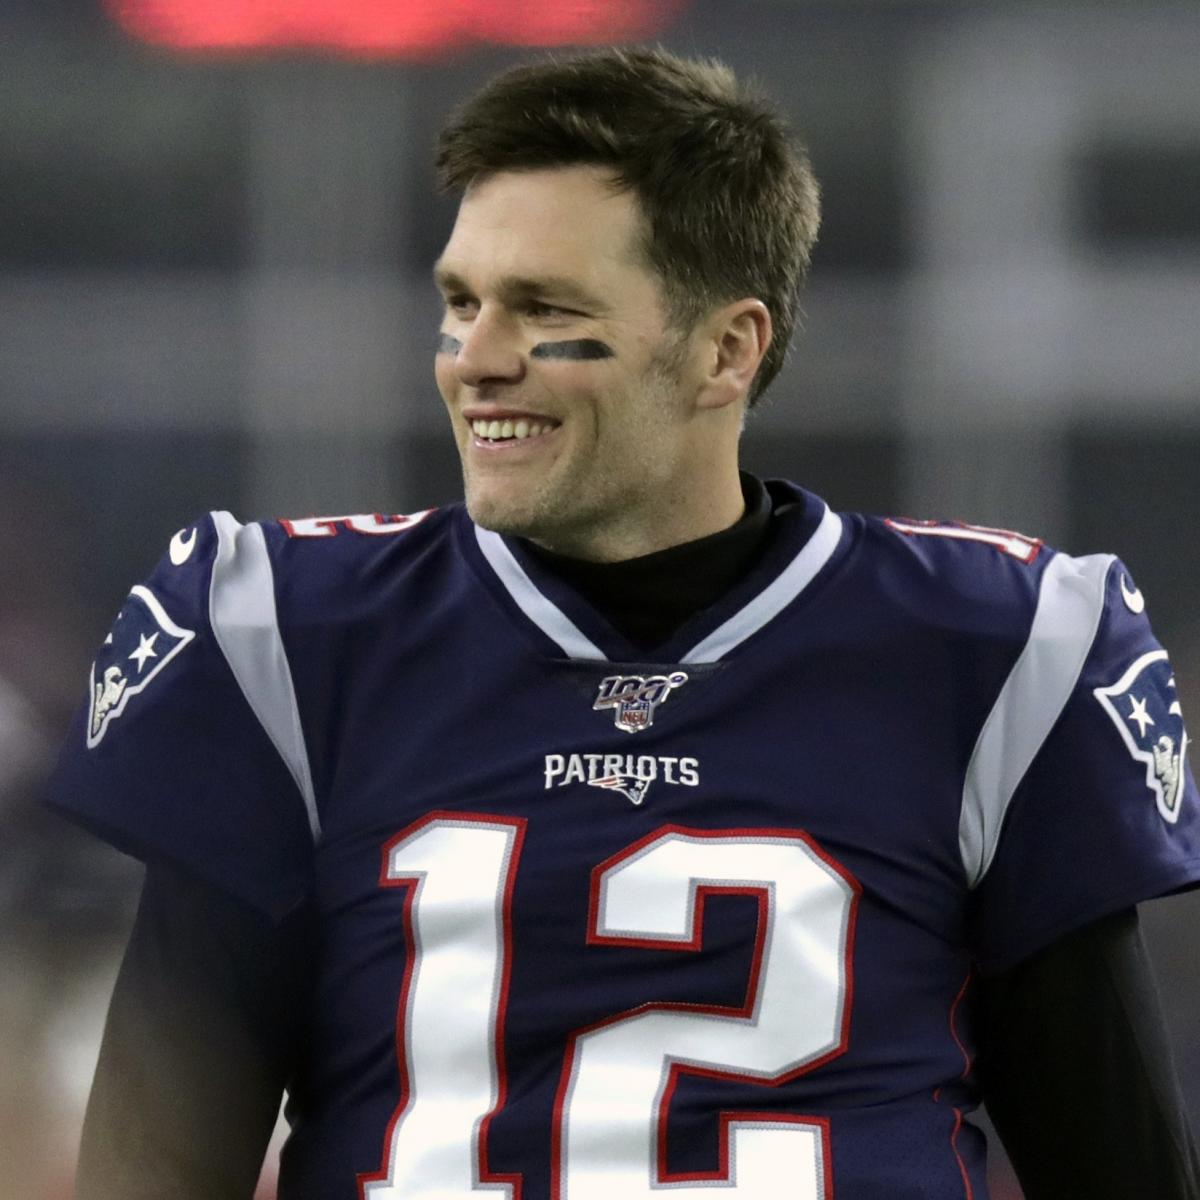 Tom Brady Jersey Sales Up 900% After Signing Contract with